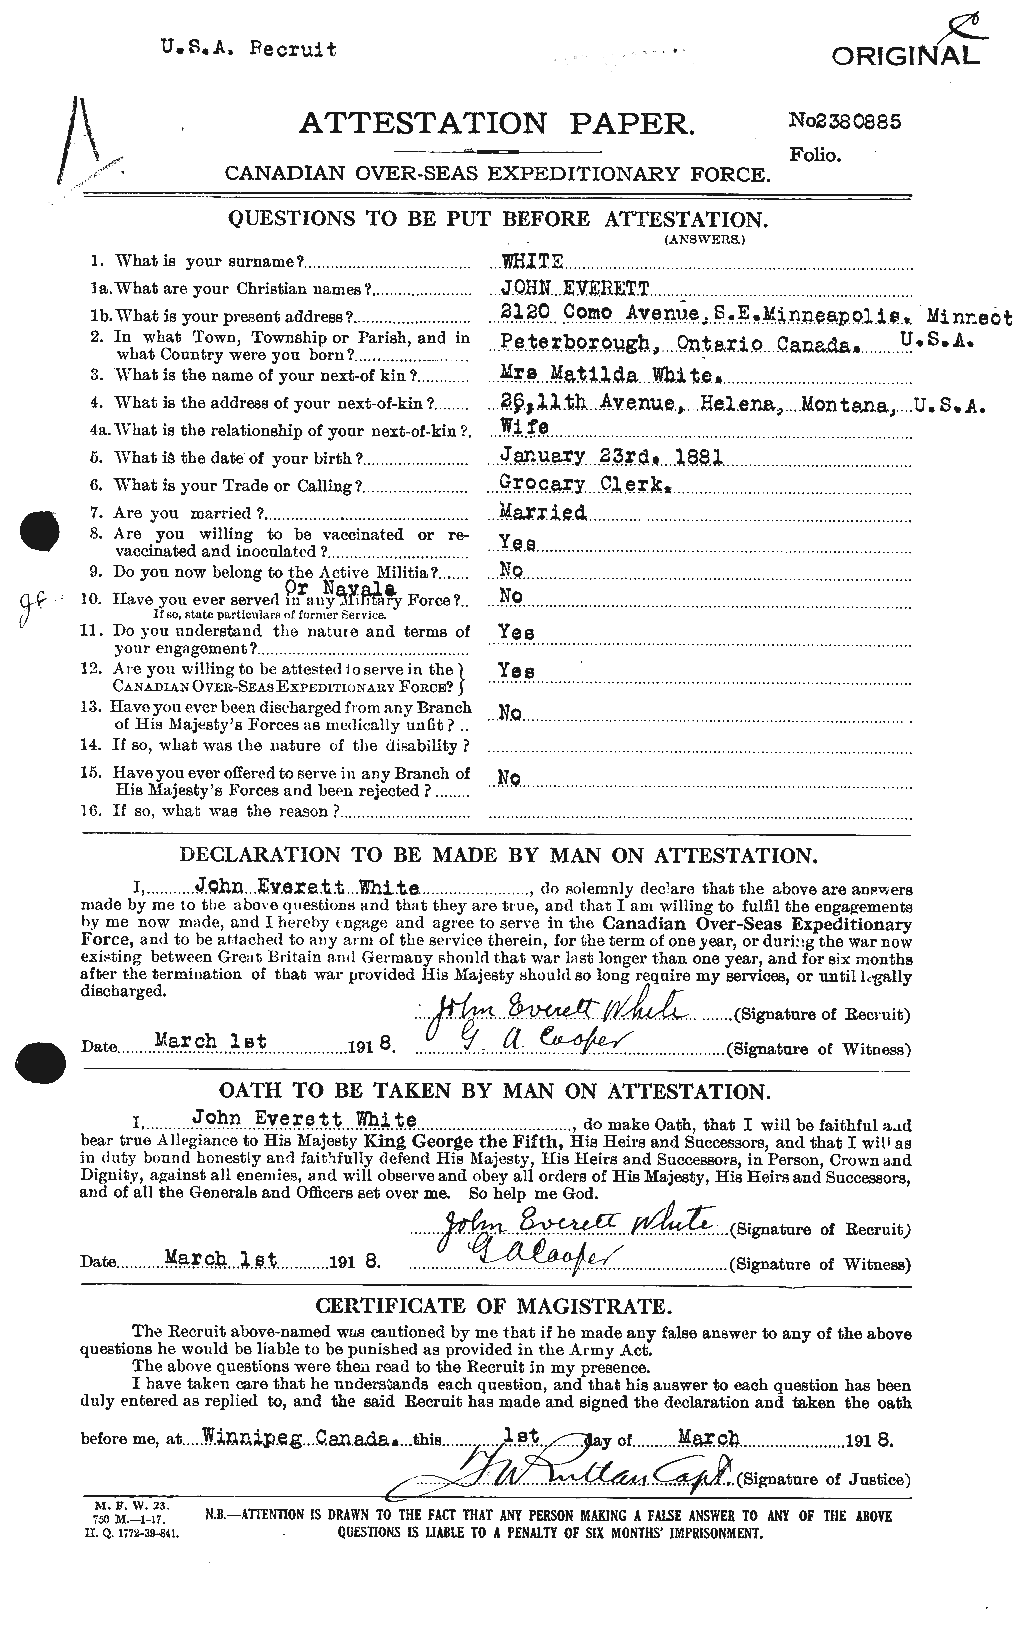 Personnel Records of the First World War - CEF 671556a